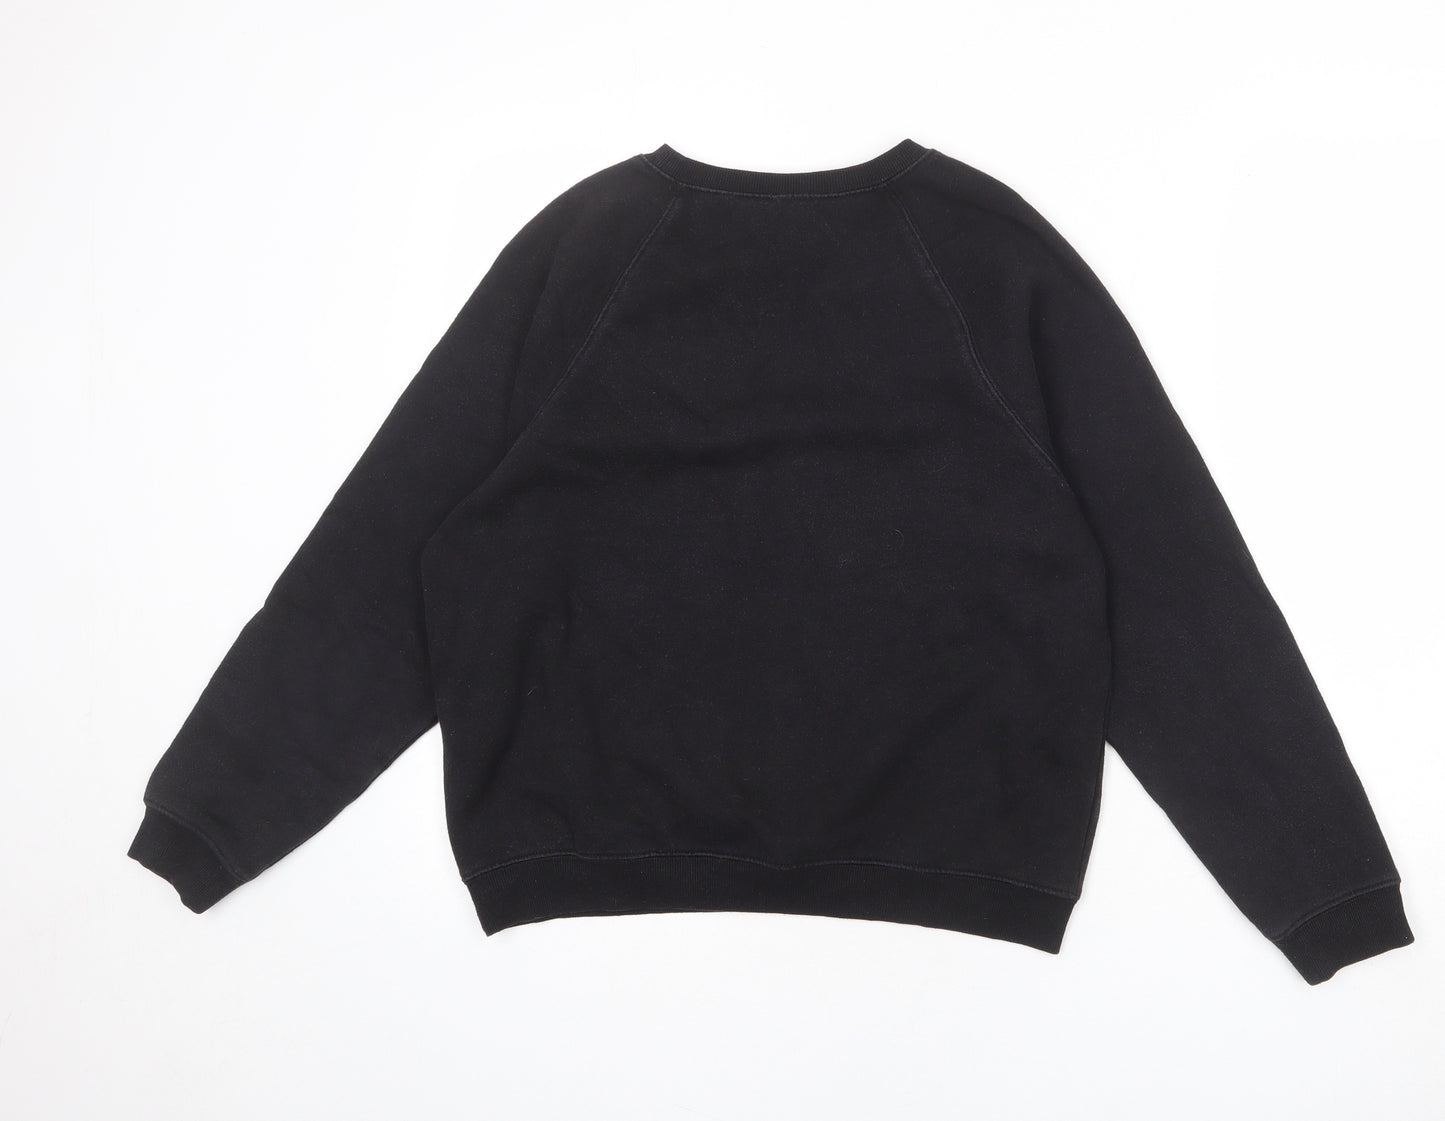 Divided by H&M Womens Black Cotton Pullover Sweatshirt Size S Pullover - Harvard